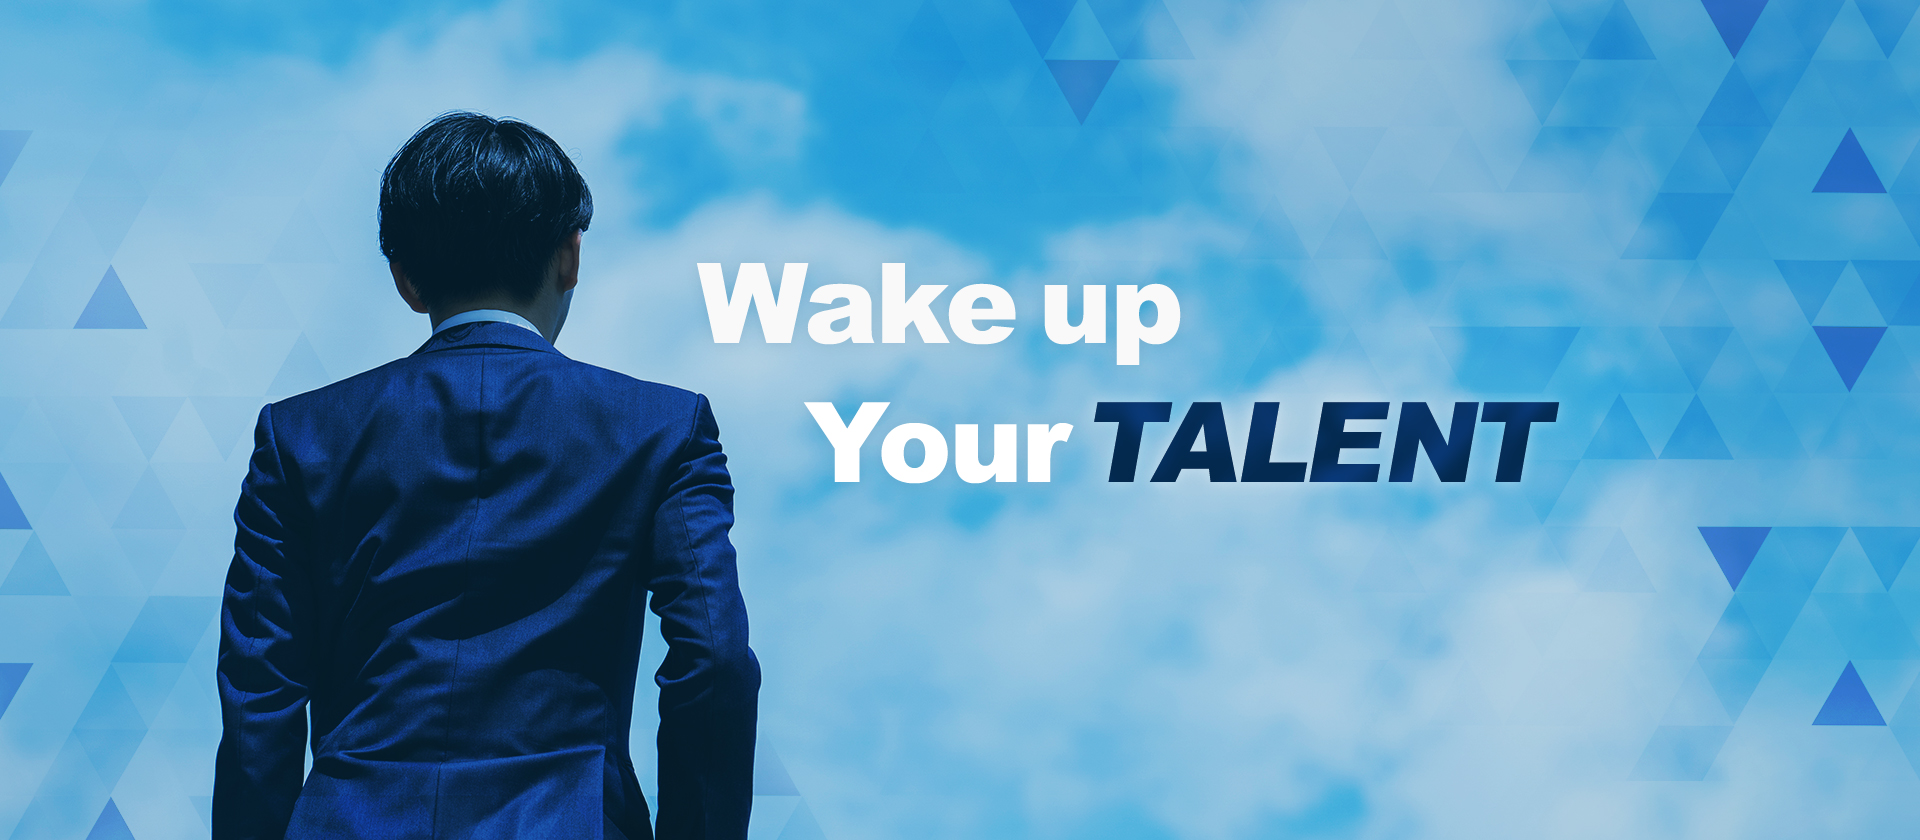 Wake up Your TALENT